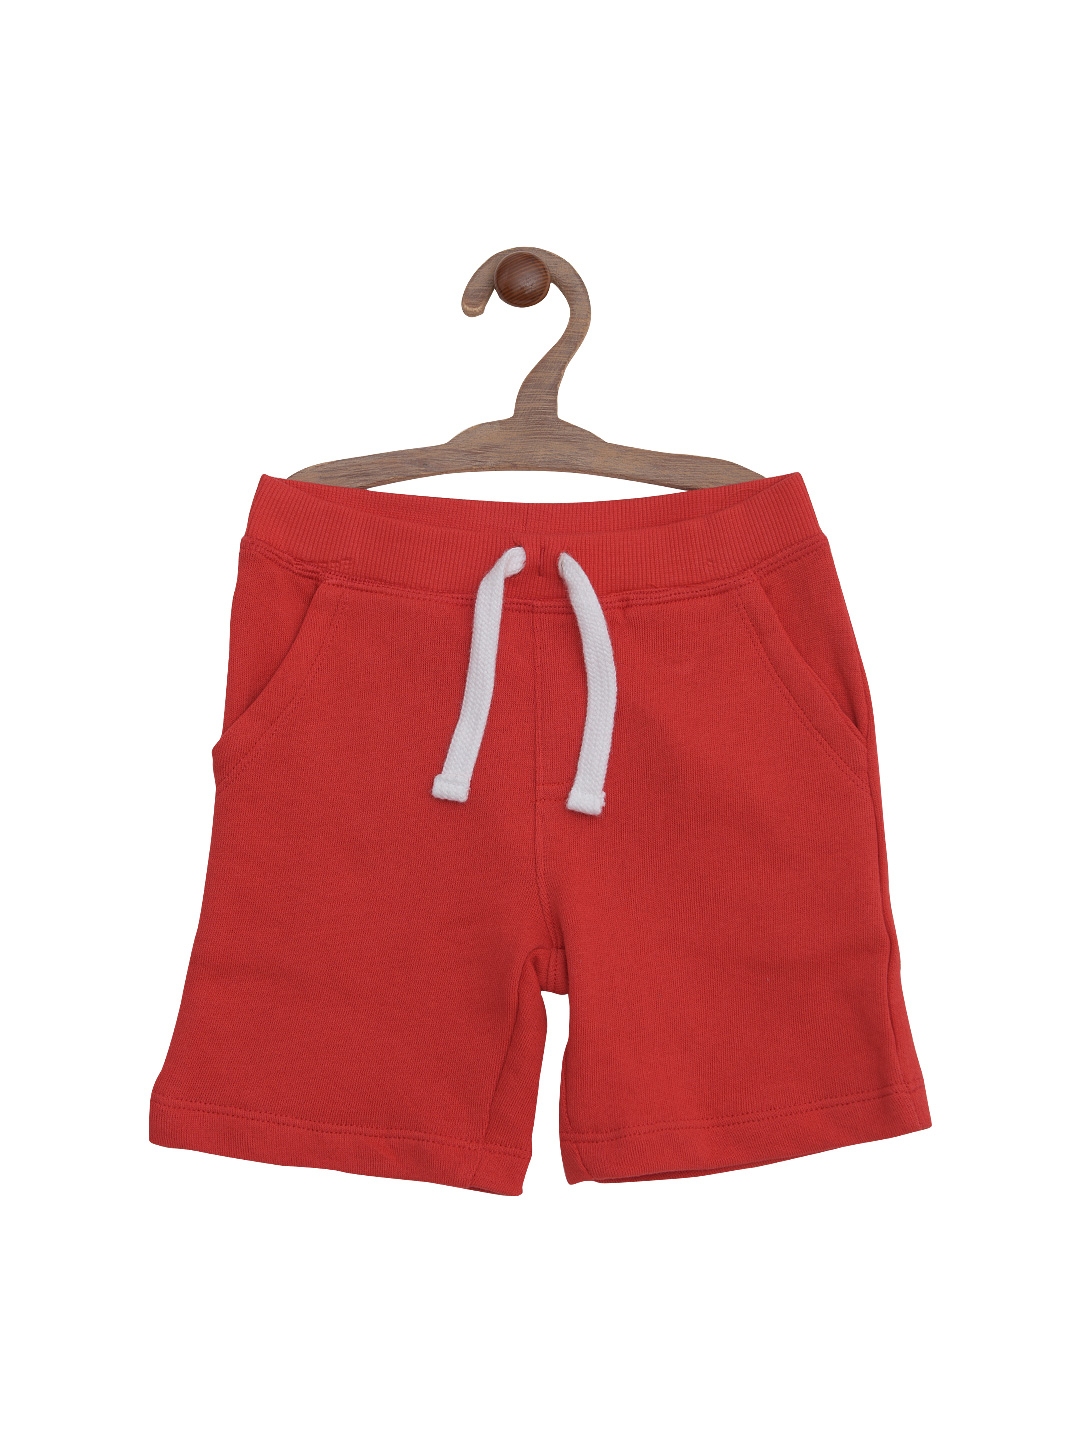 Buy Red Shorts for Boys by Mothercare Online